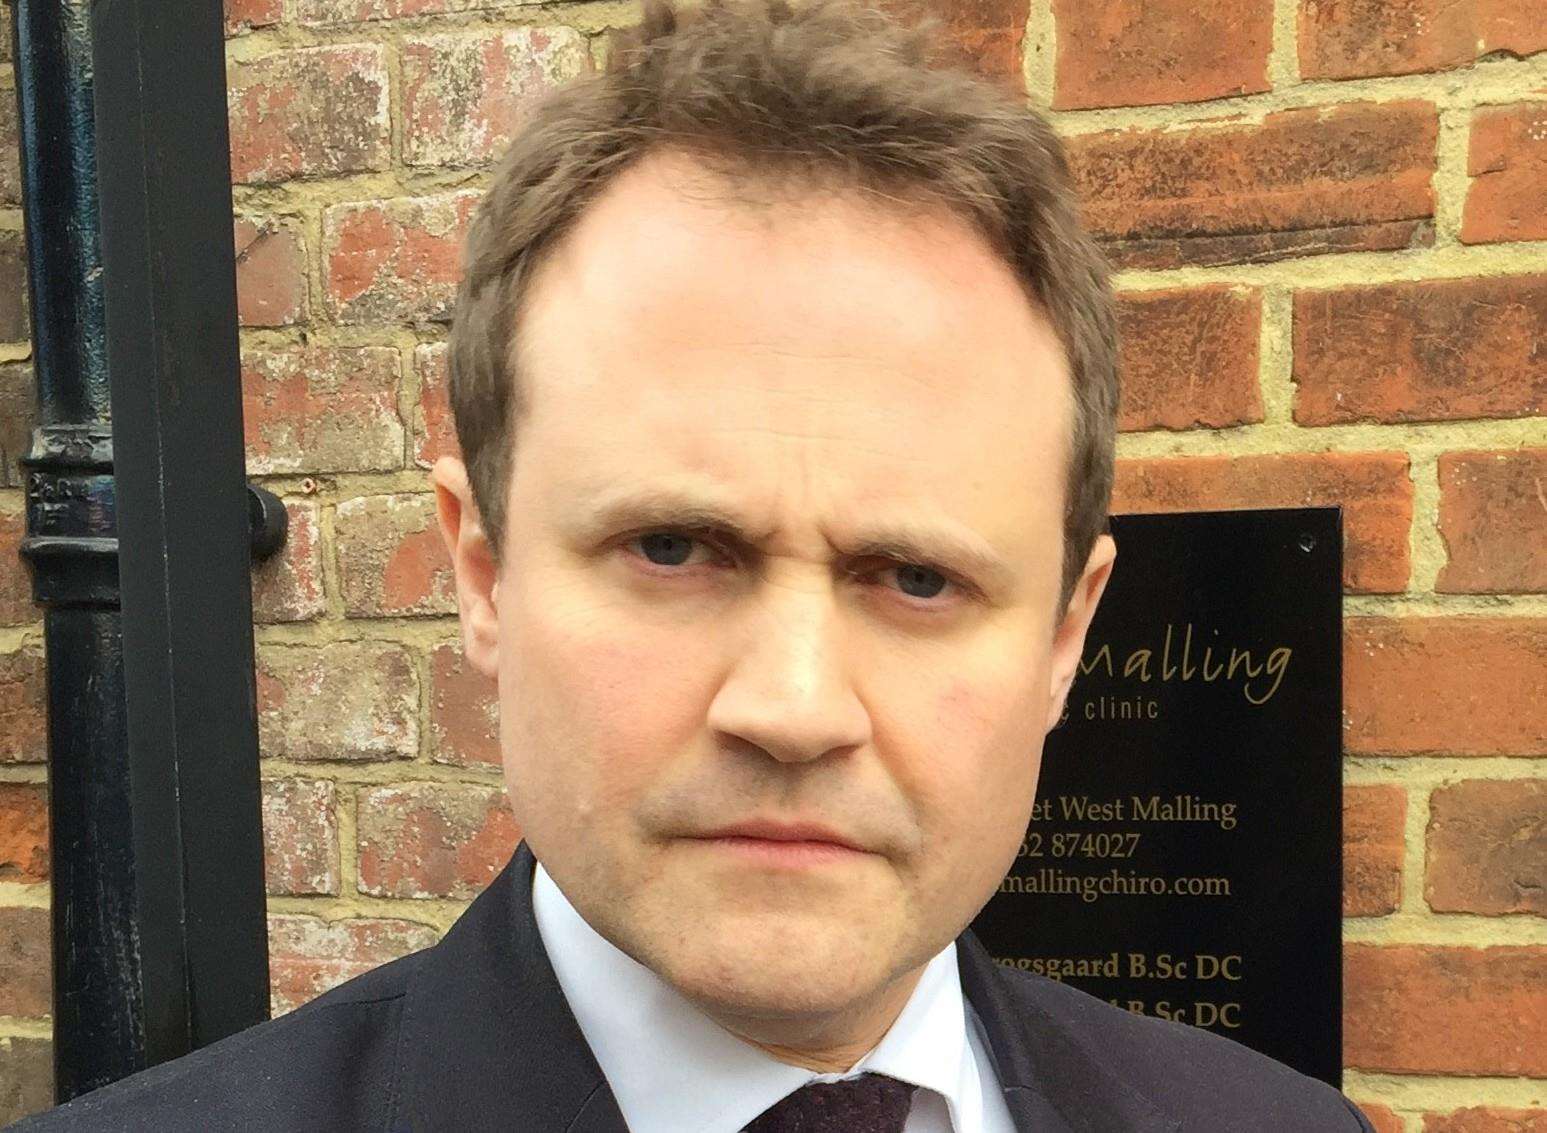 Tom Tugendhat is "demanding answers" over the planned closure